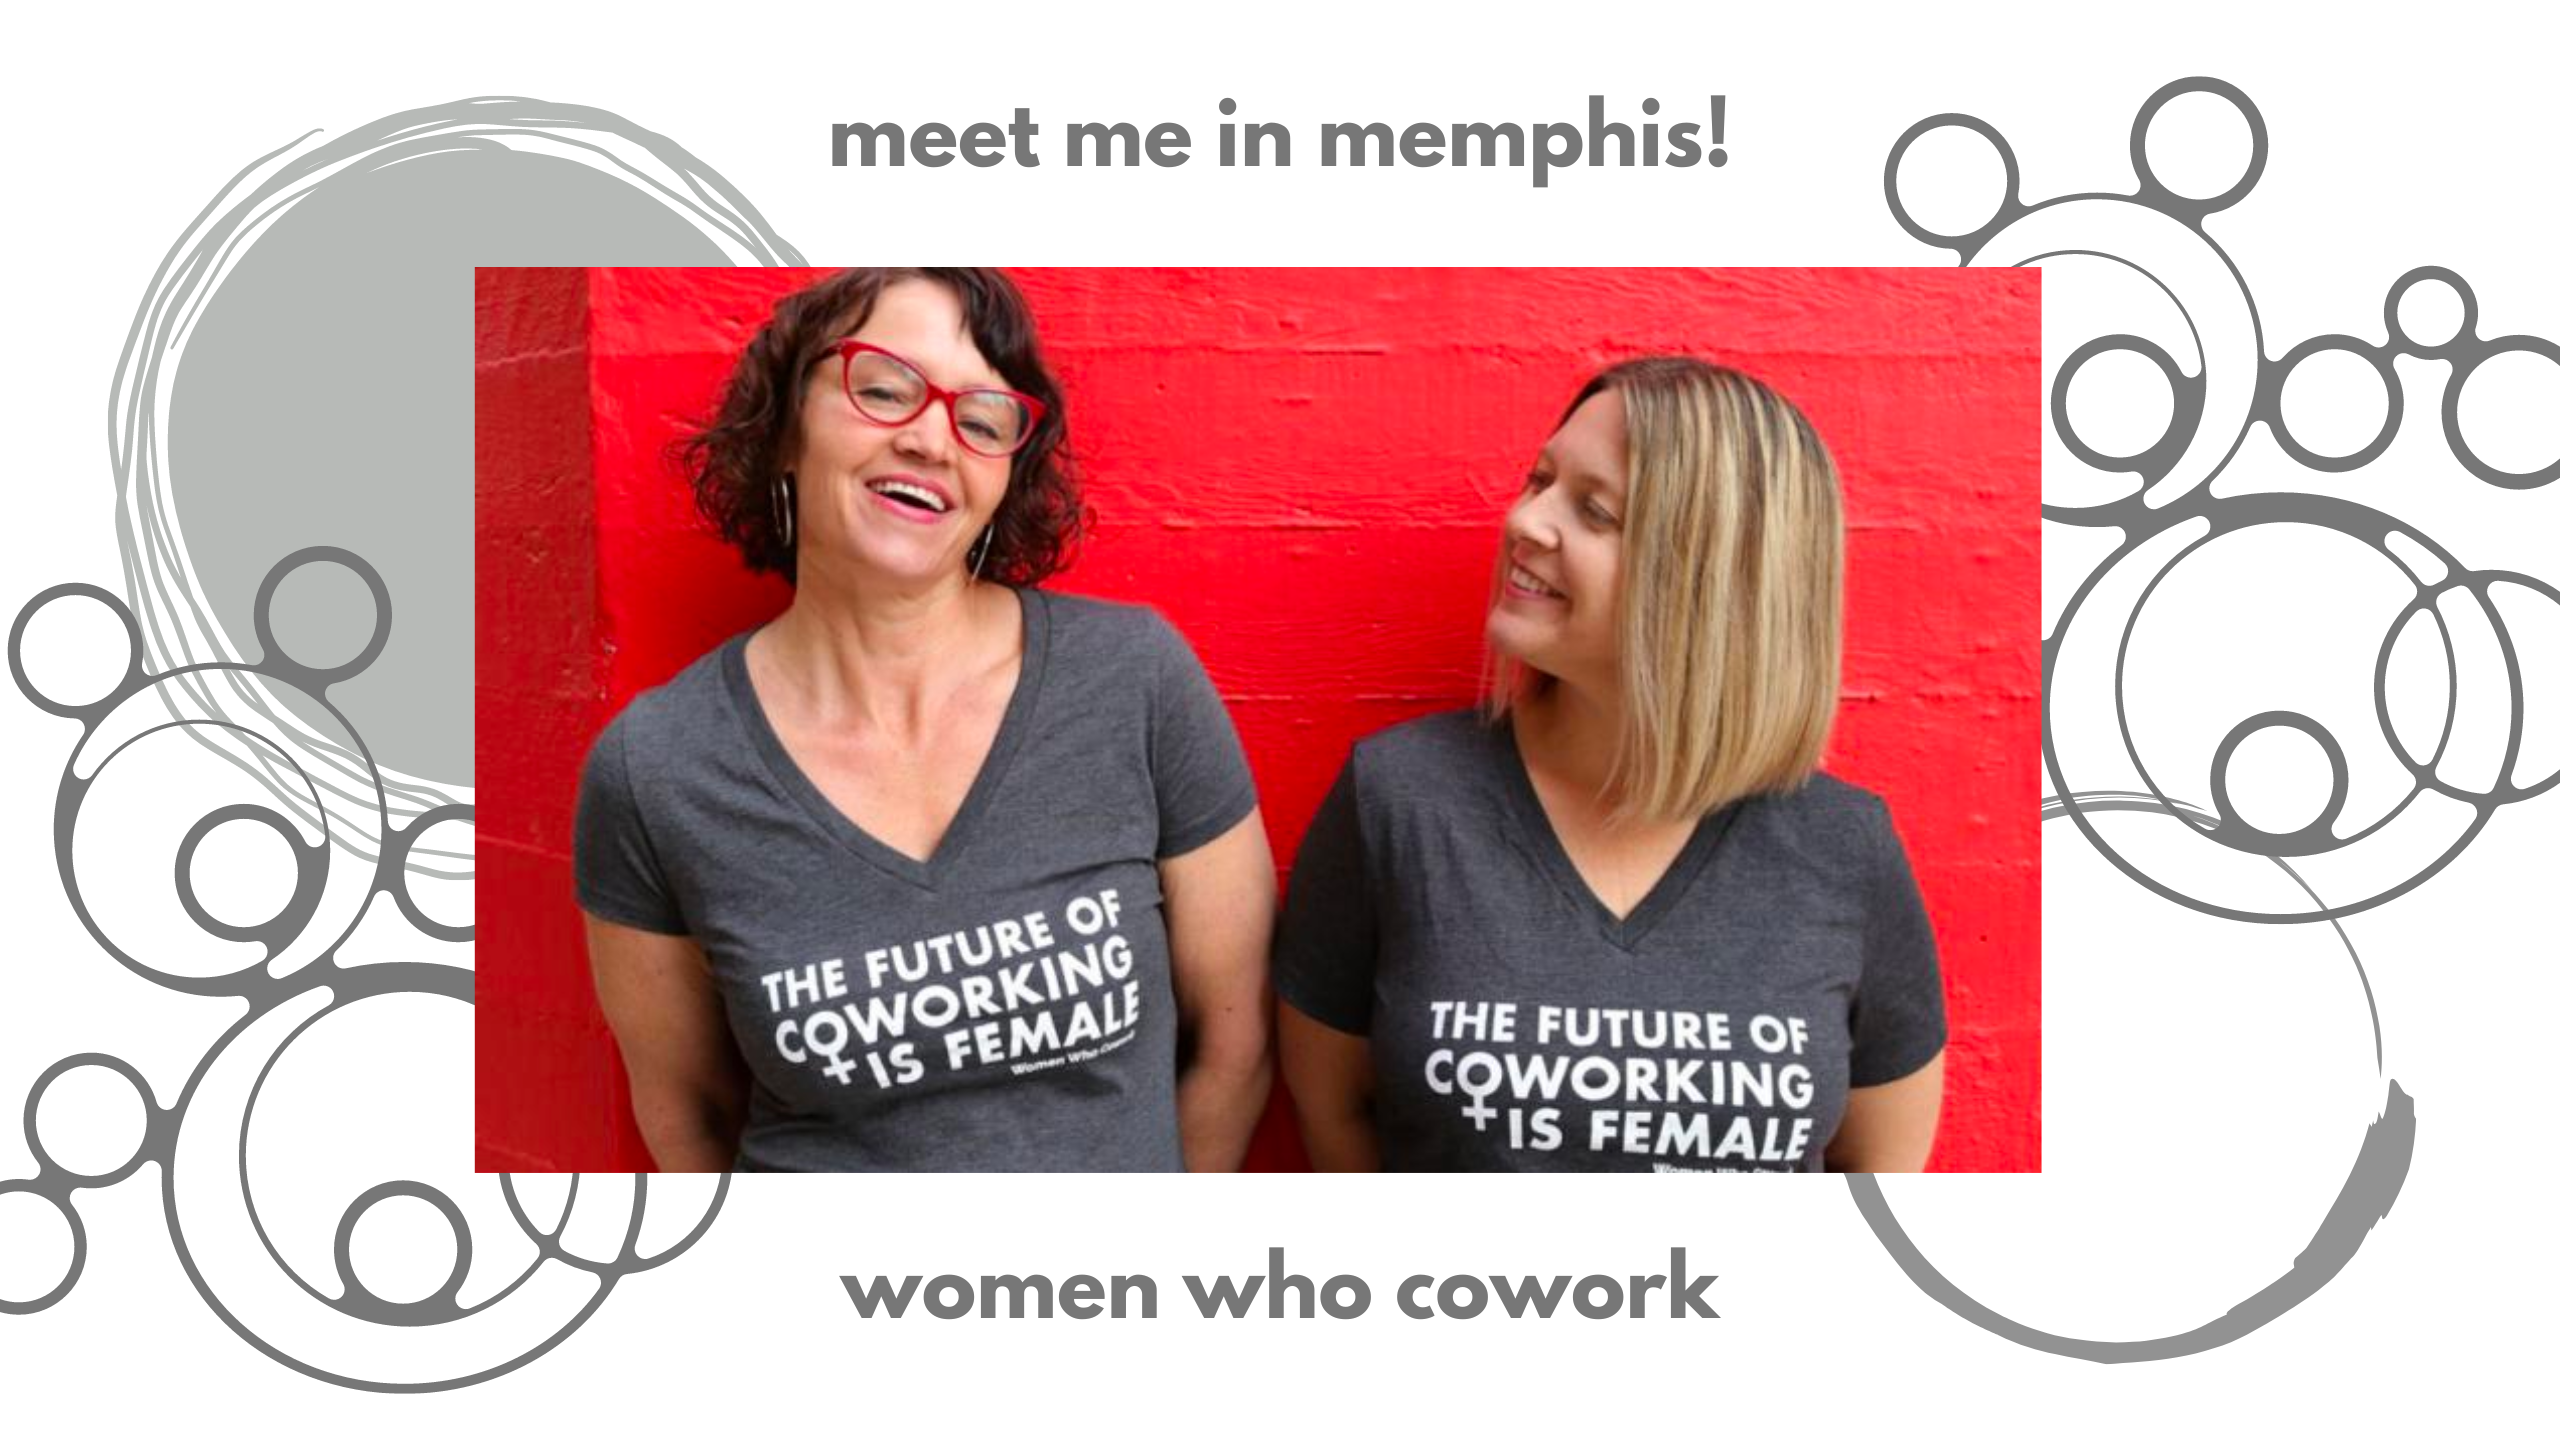 Iris Kavanaugh and Laura Shook of Women Who Cowork in t-shirts that say 